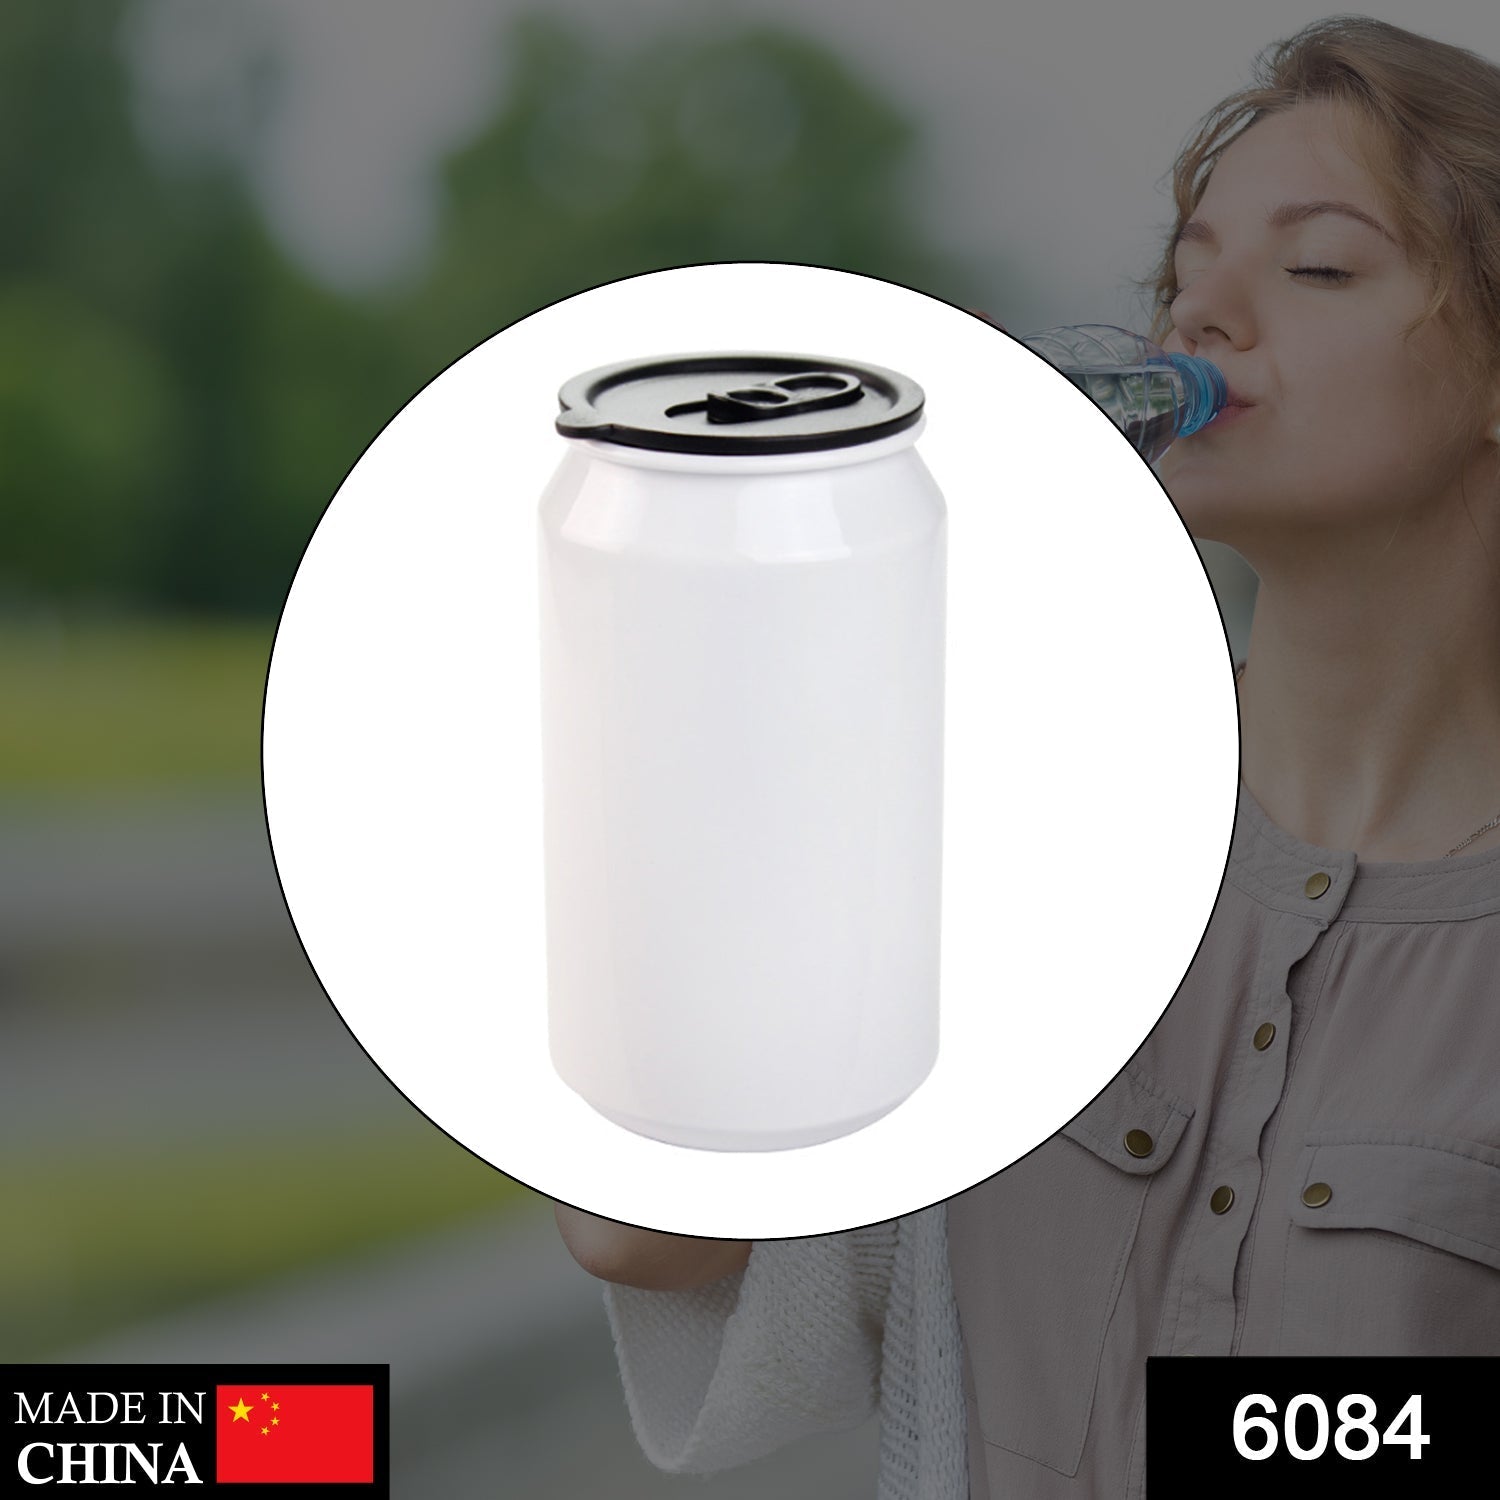 6084 CNB Bottle 3 used in all kinds of places like household and official for storing and drinking water and some beverages etc.